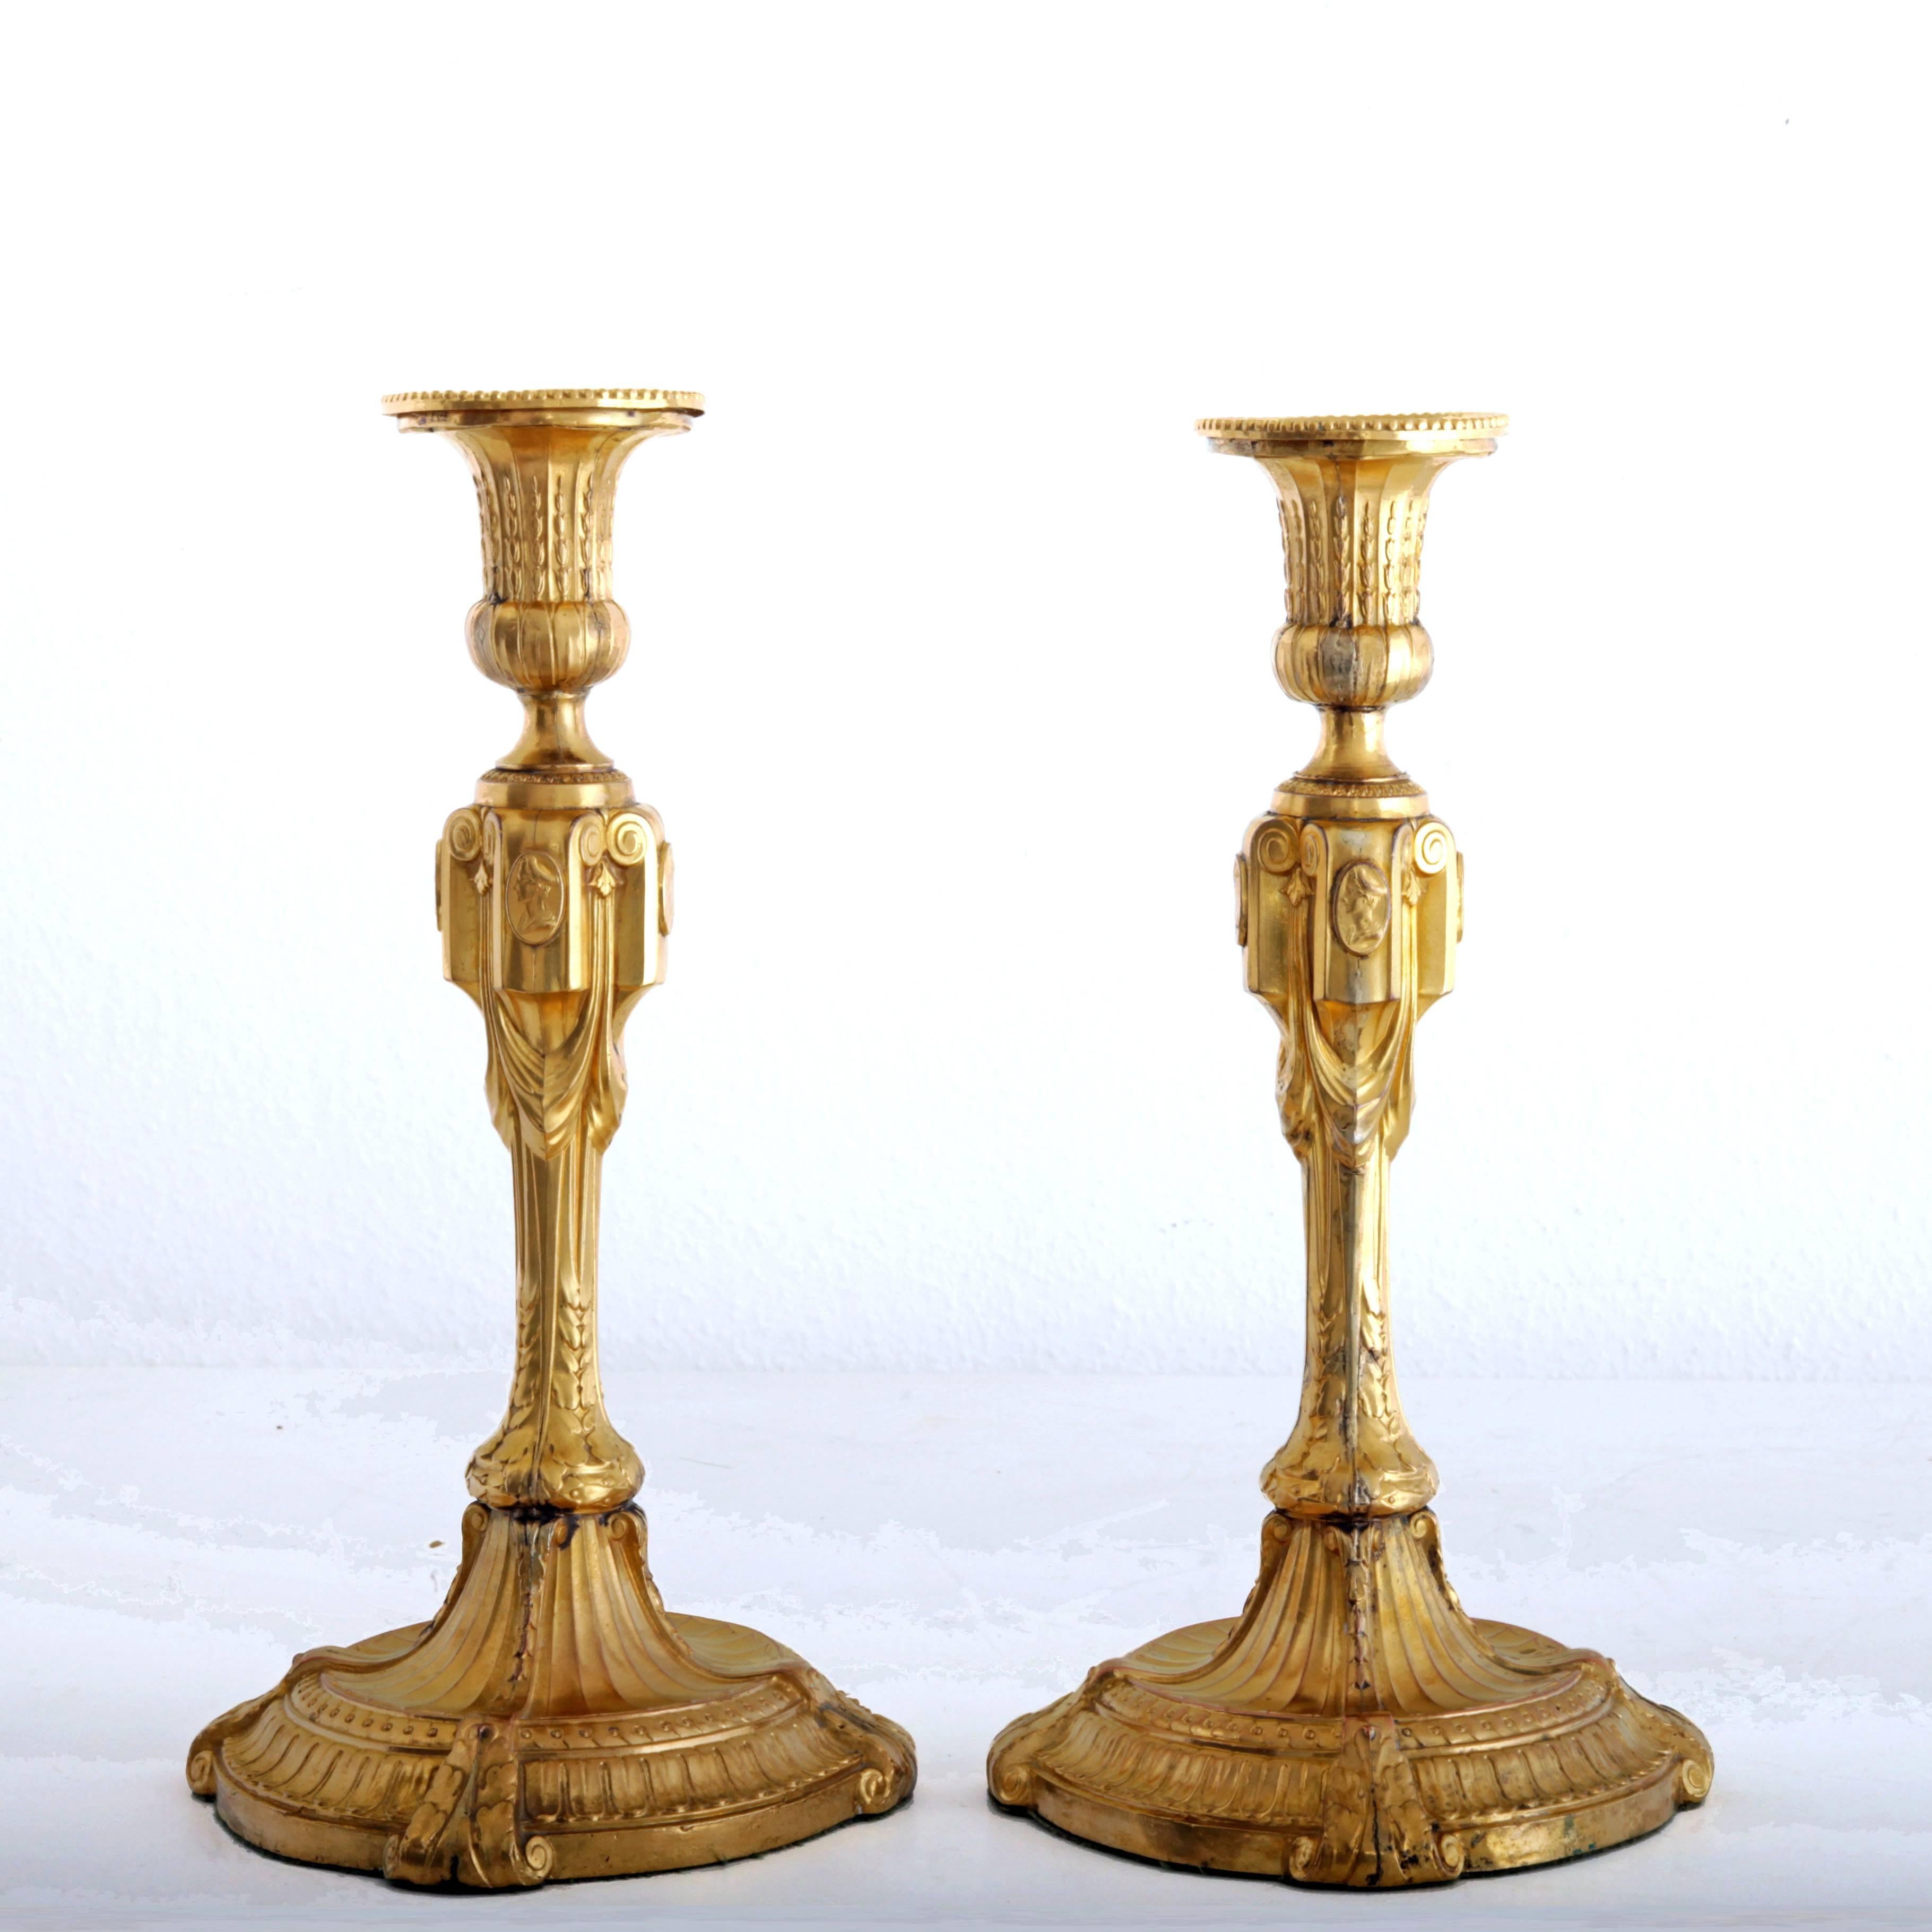 Pair of gilt metal candlesticks with neoclassical decor and scrolls. The shaft is decorated with cameos.